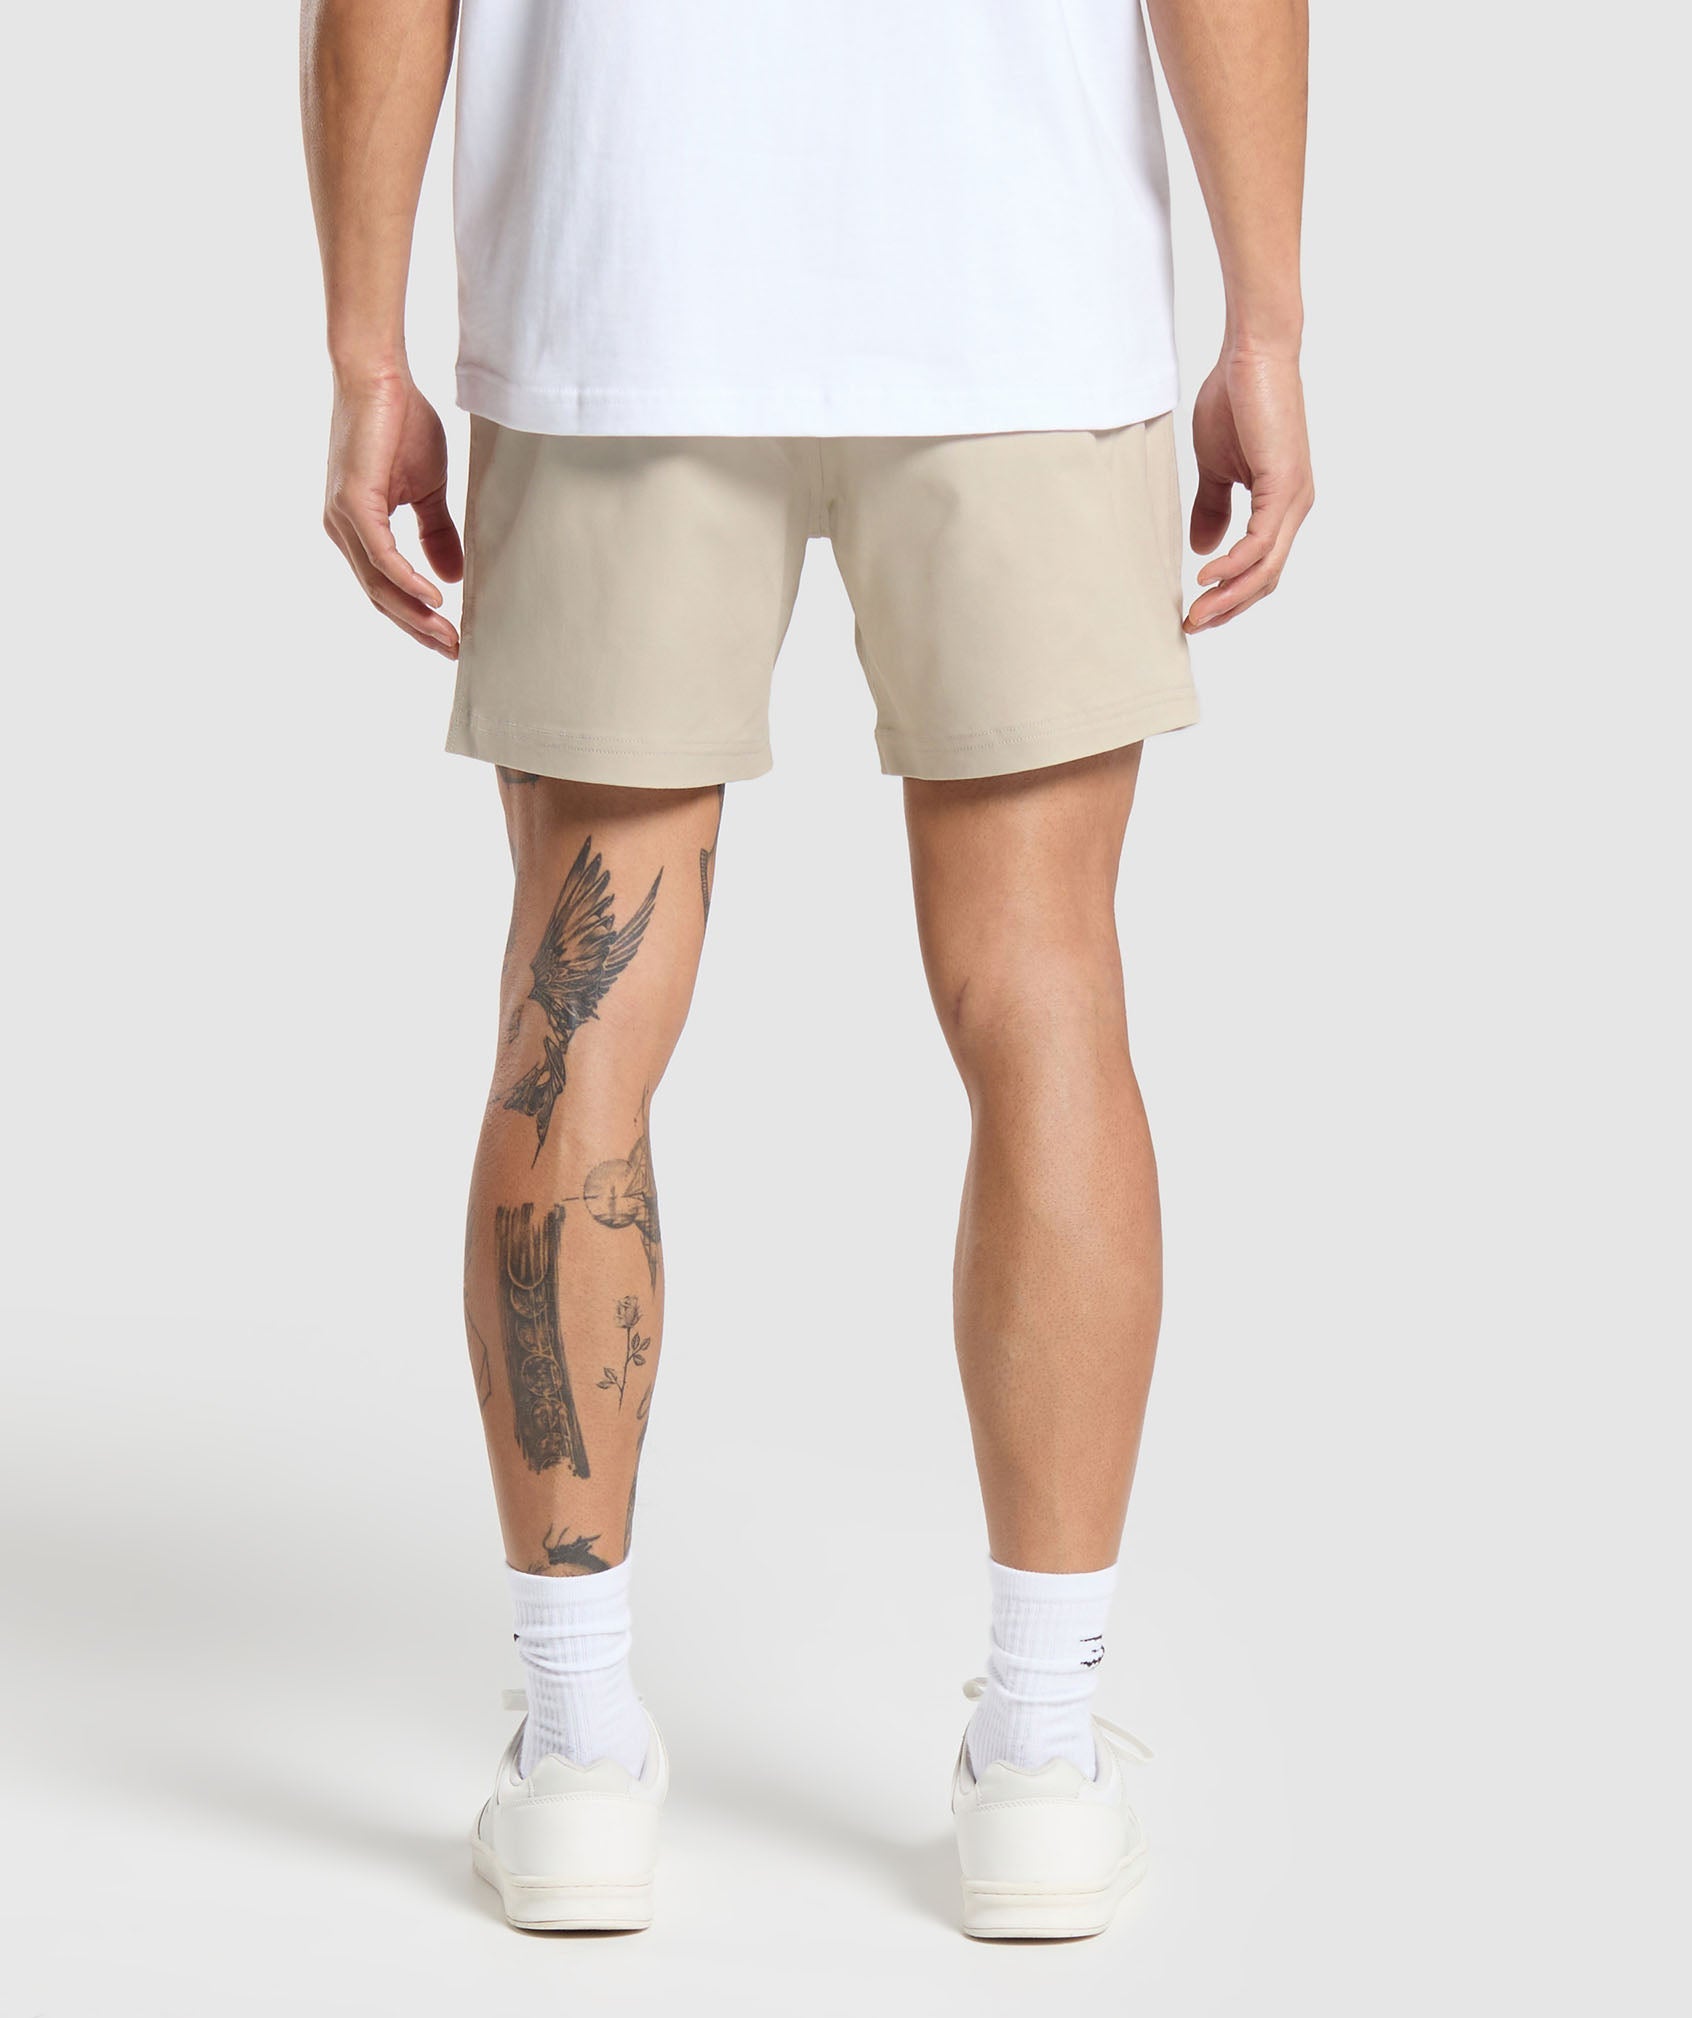 Rest Day Woven Shorts in Pebble Grey - view 2